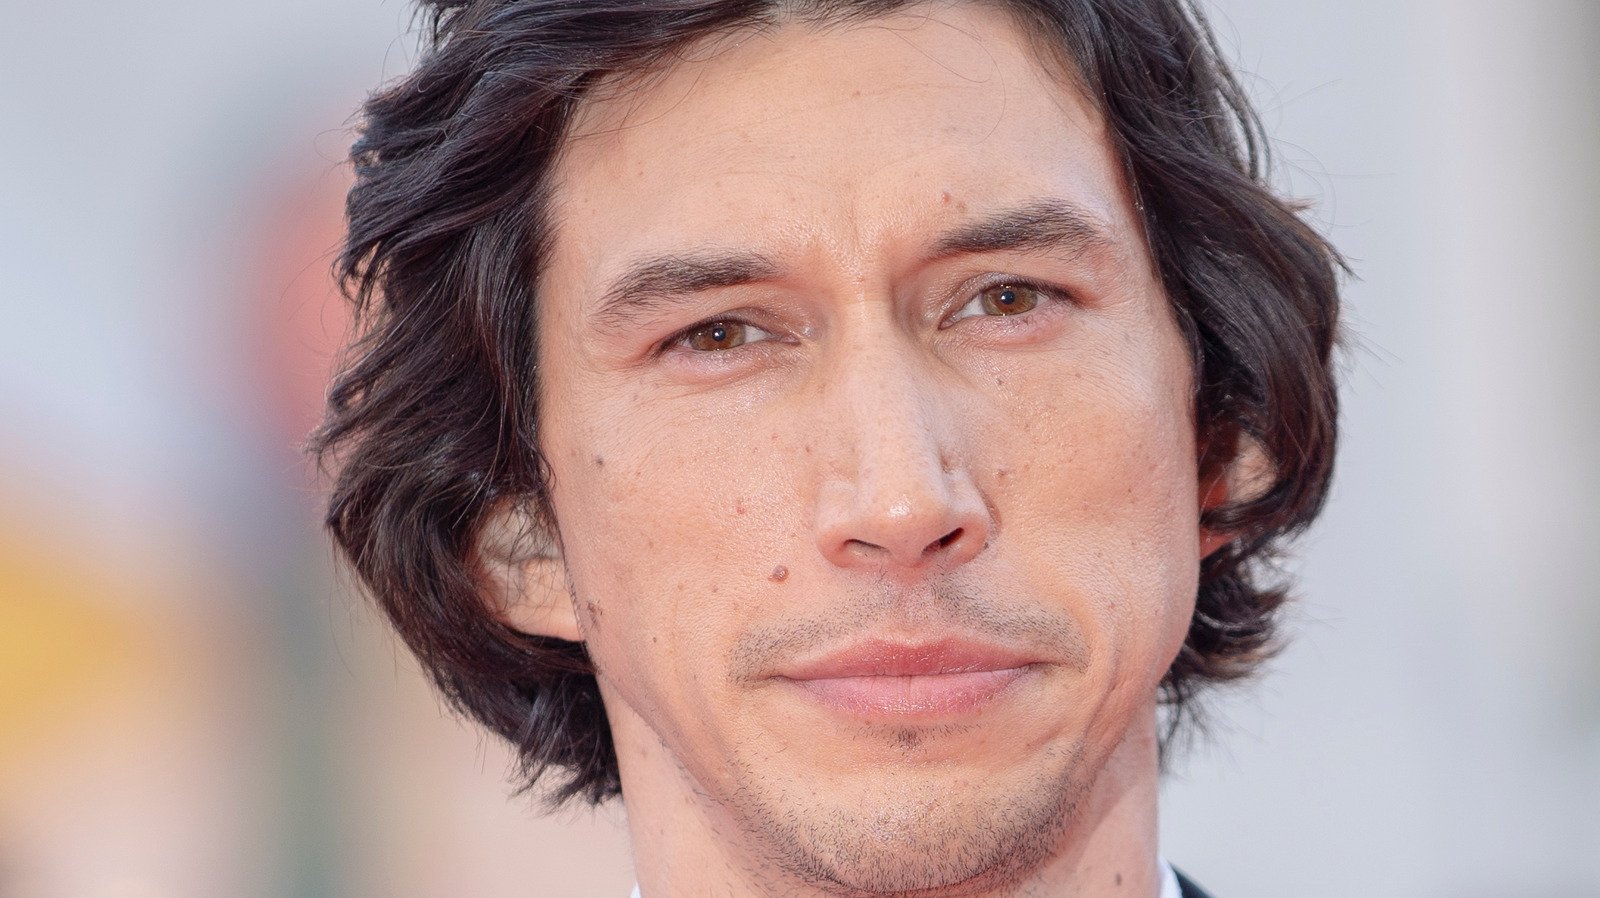 Happy Birthday to the Original Man, the elusive Sasquatch, the fuckable Redwood, the only man ever, Mr. Adam Driver. 